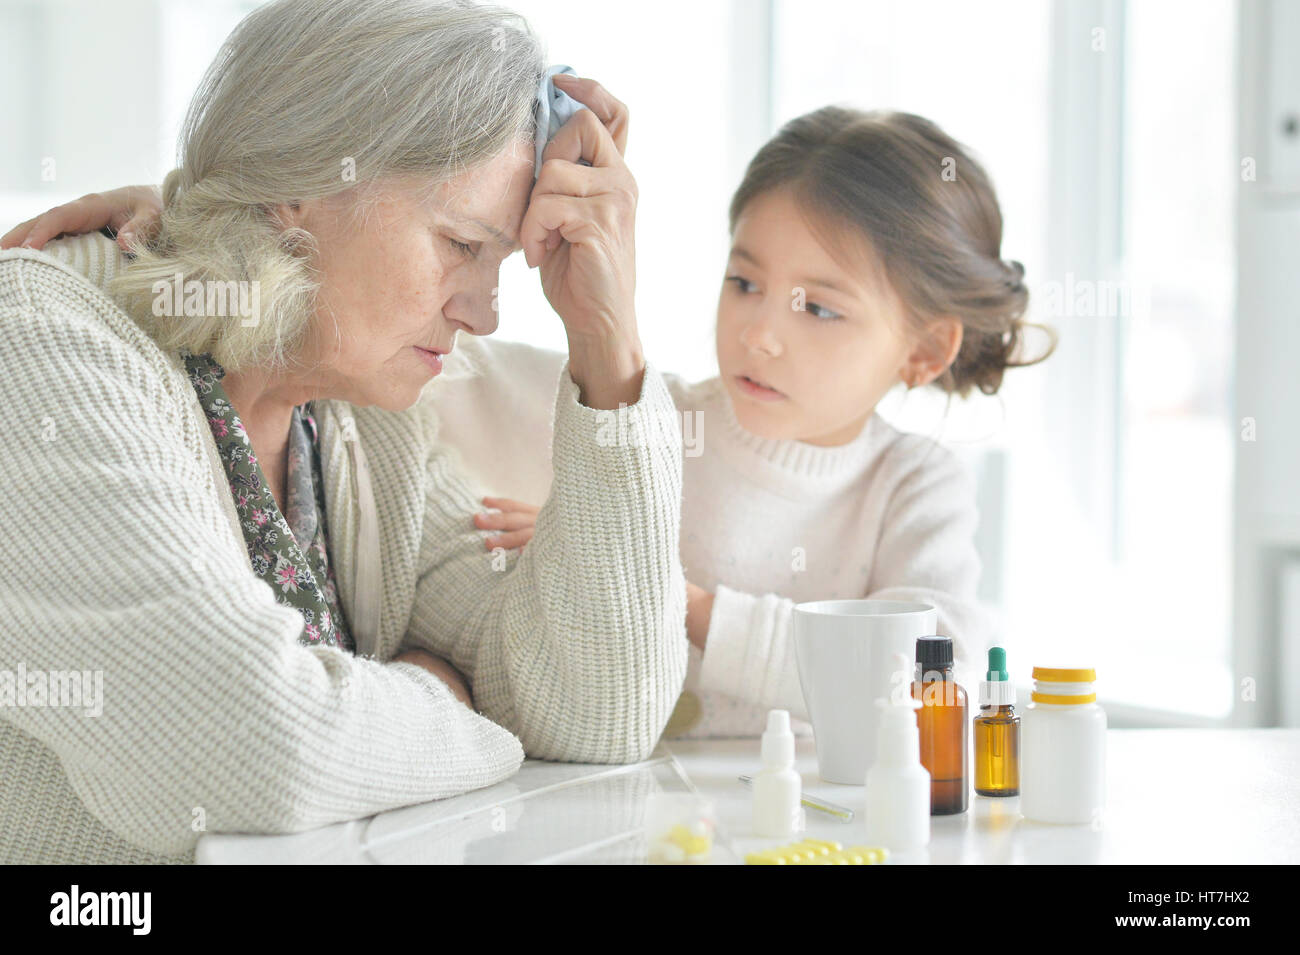 Granddaughter takes care of a sick grandmother Stock Photo